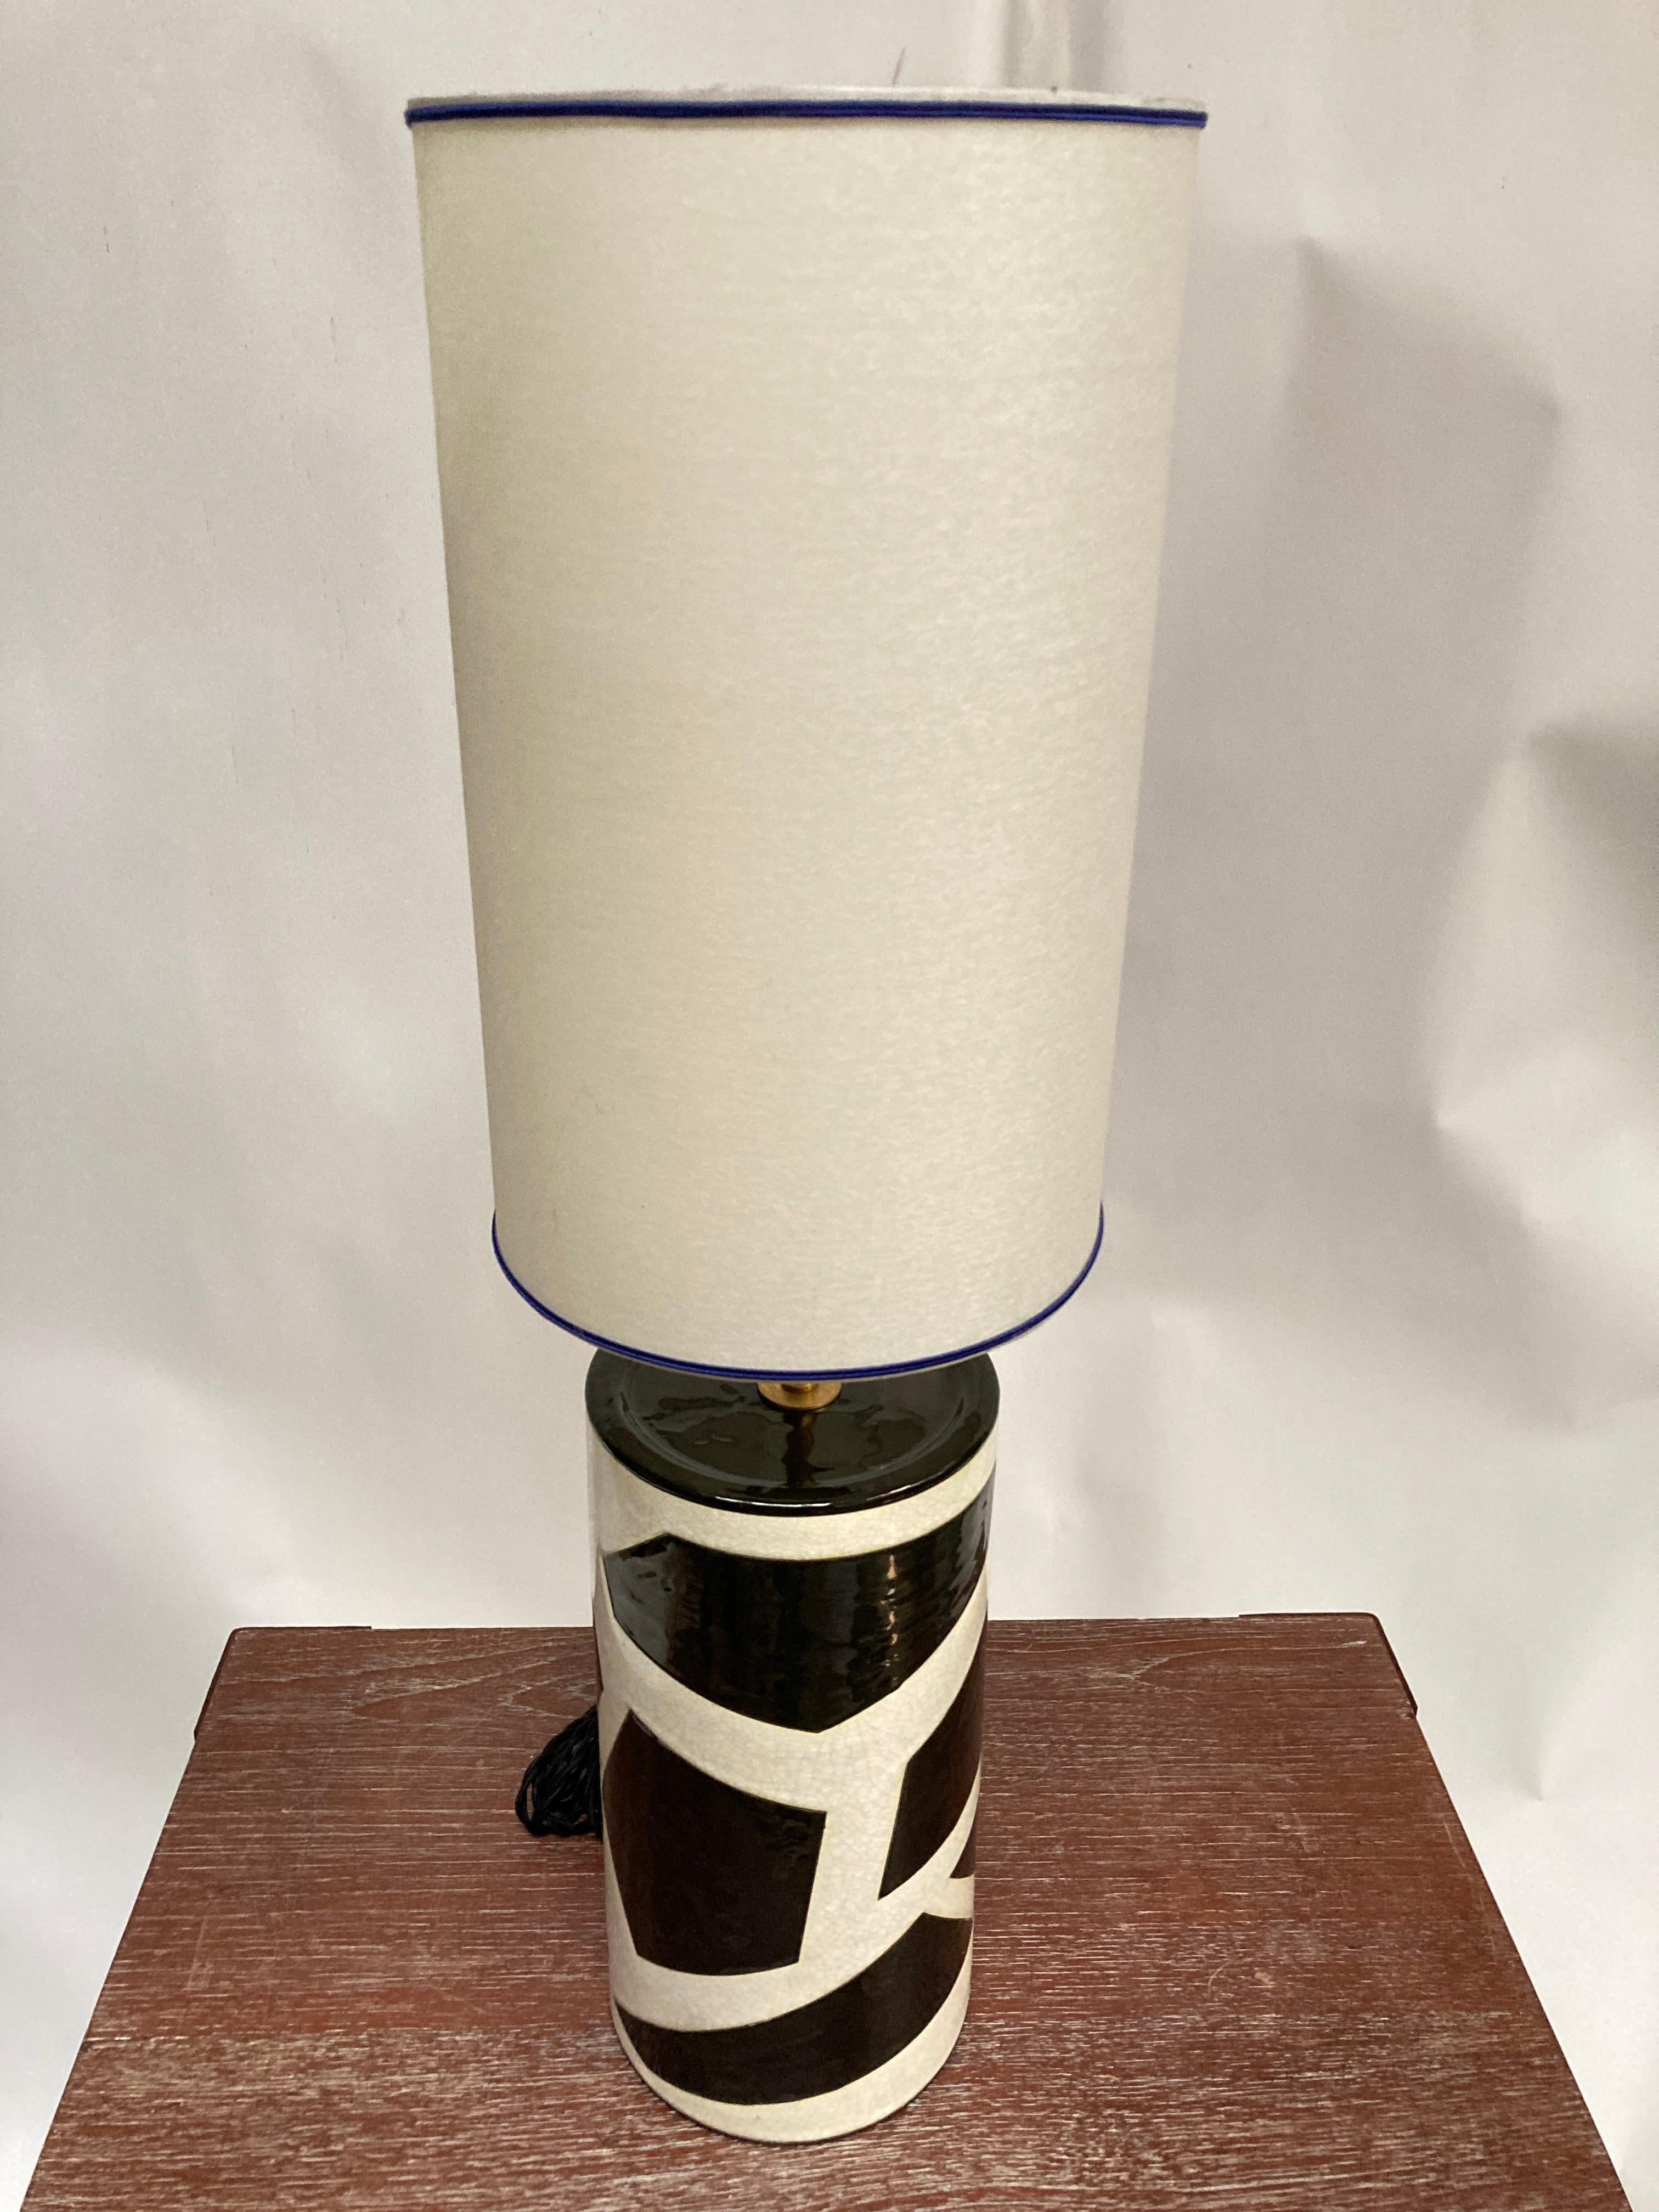 Rare  1980's ceramic lamp by Emaux de Longwy  ( North East of France )
Typical 80's design
Dimensions given without shade
No shade included